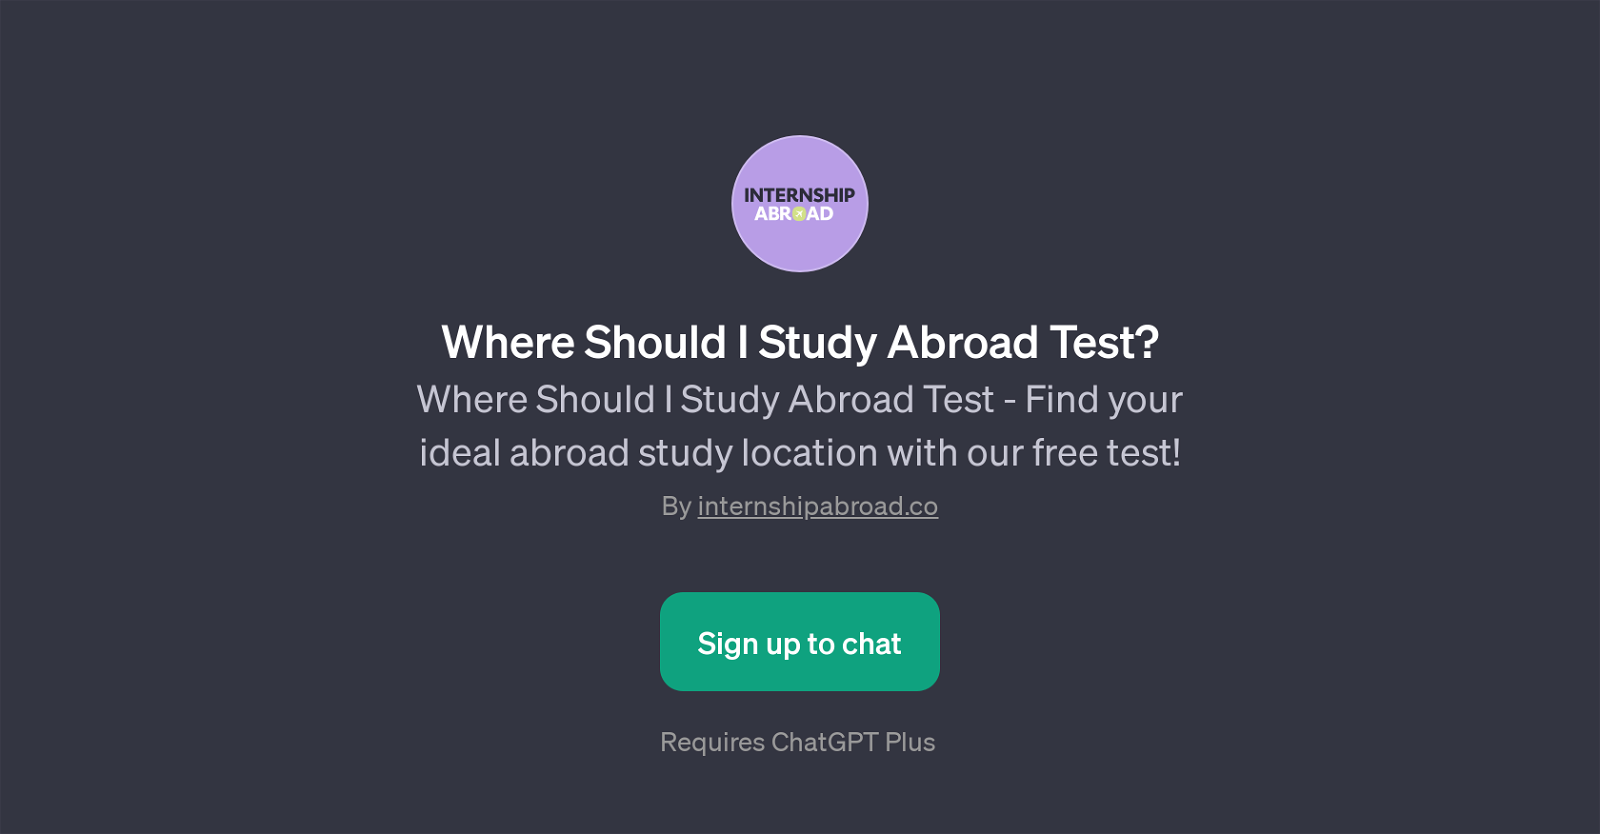 Where Should I Study Abroad Test website